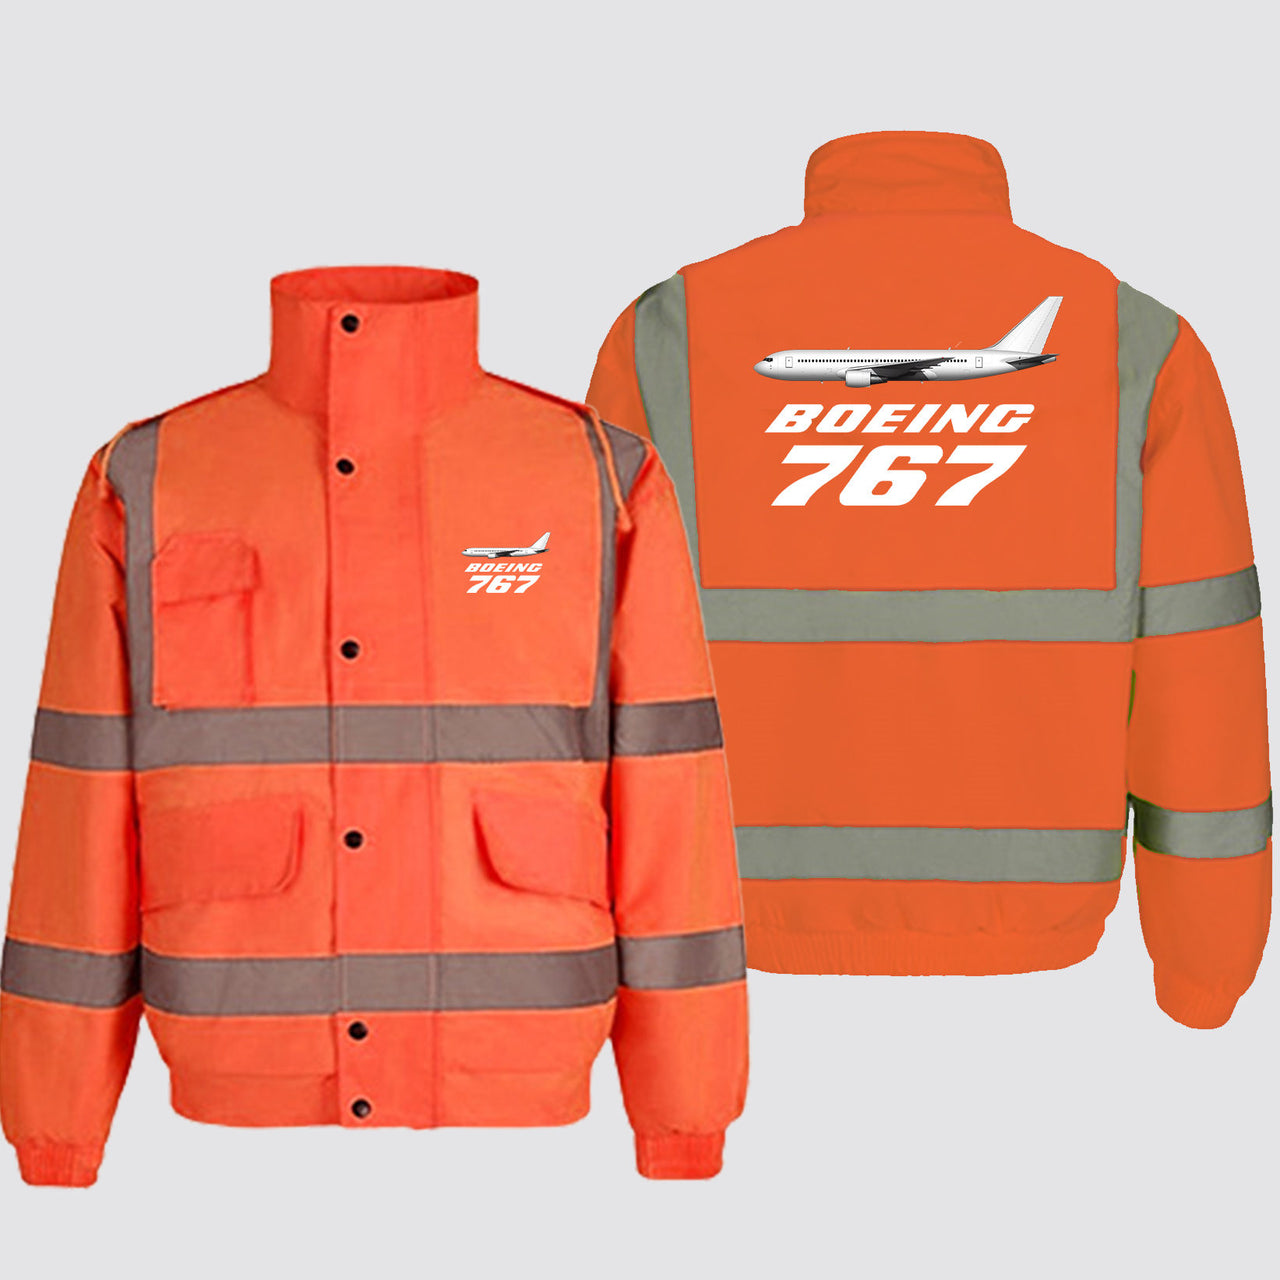 The Boeing 767 Designed Reflective Winter Jackets